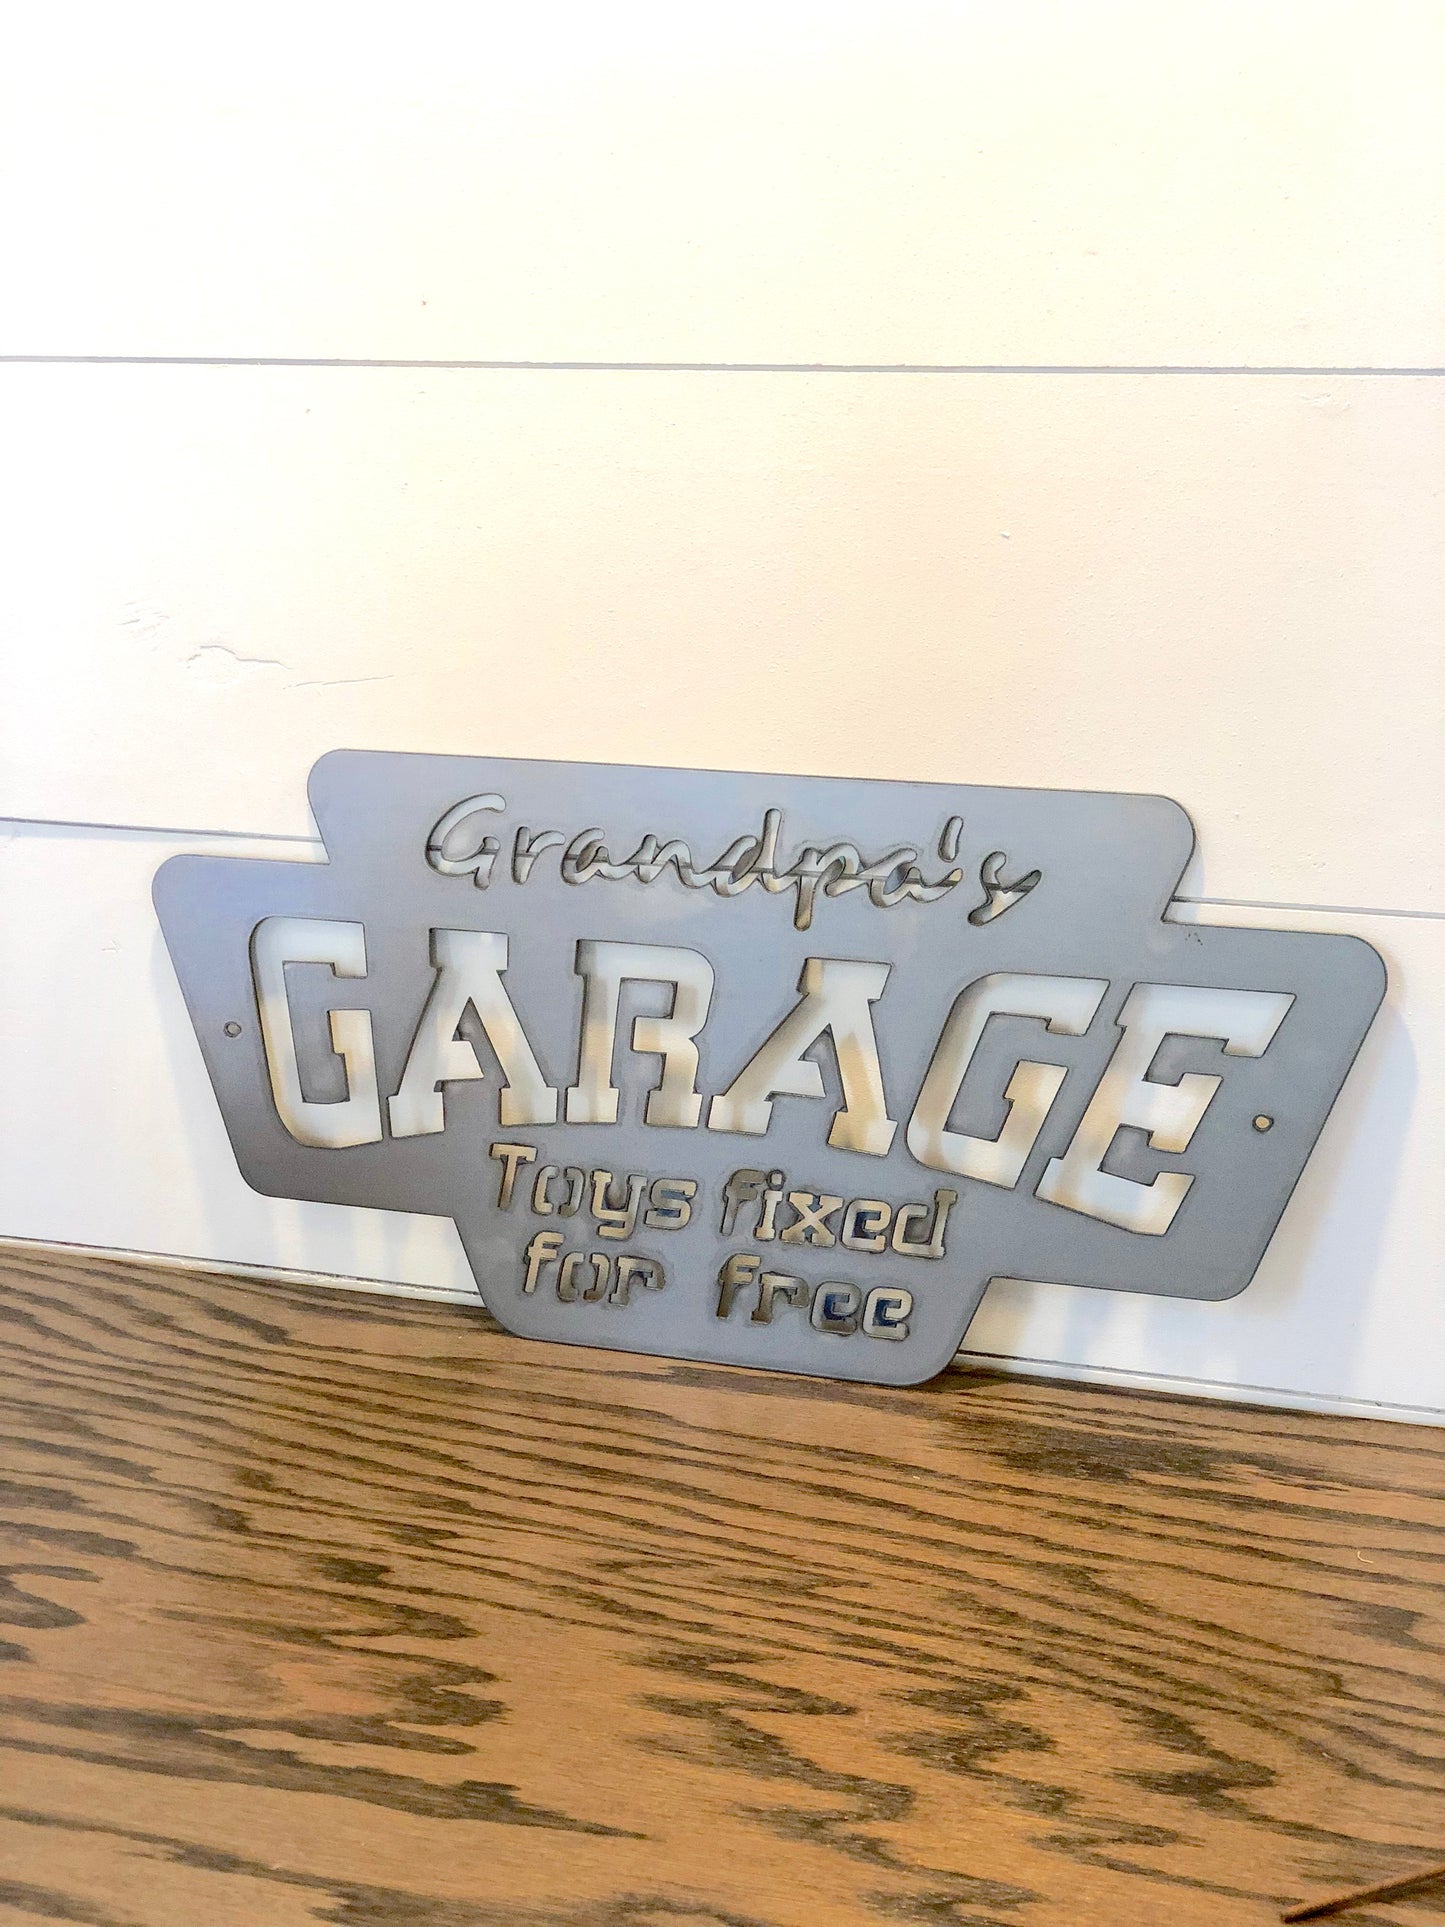 Grandpa's Garage - Toys fixed for free Metal Wall Hanging